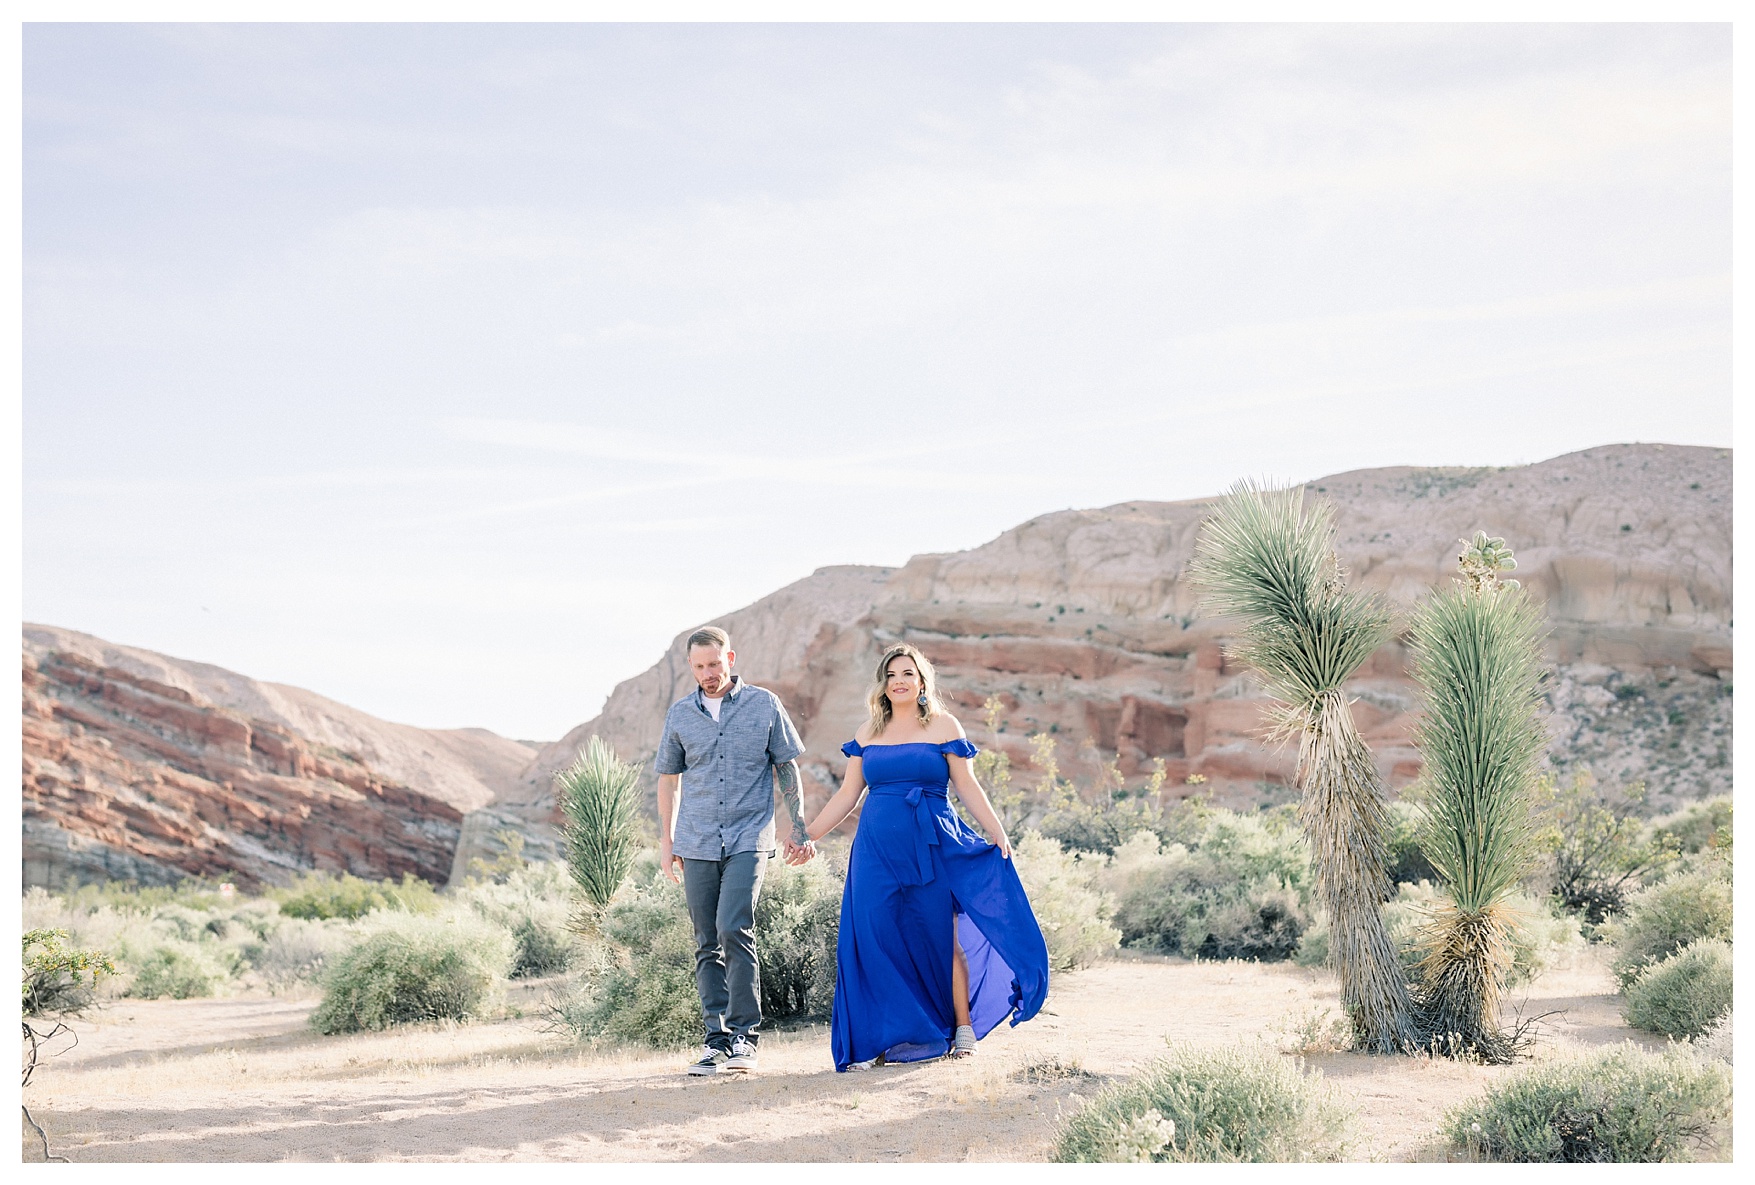 Red Rock Canyon, Red Rock Canyon Engagement session, California engagement session, Engagement Photographer, California Photographer, Bakersfield Photographer, Bakersfield California Photographer